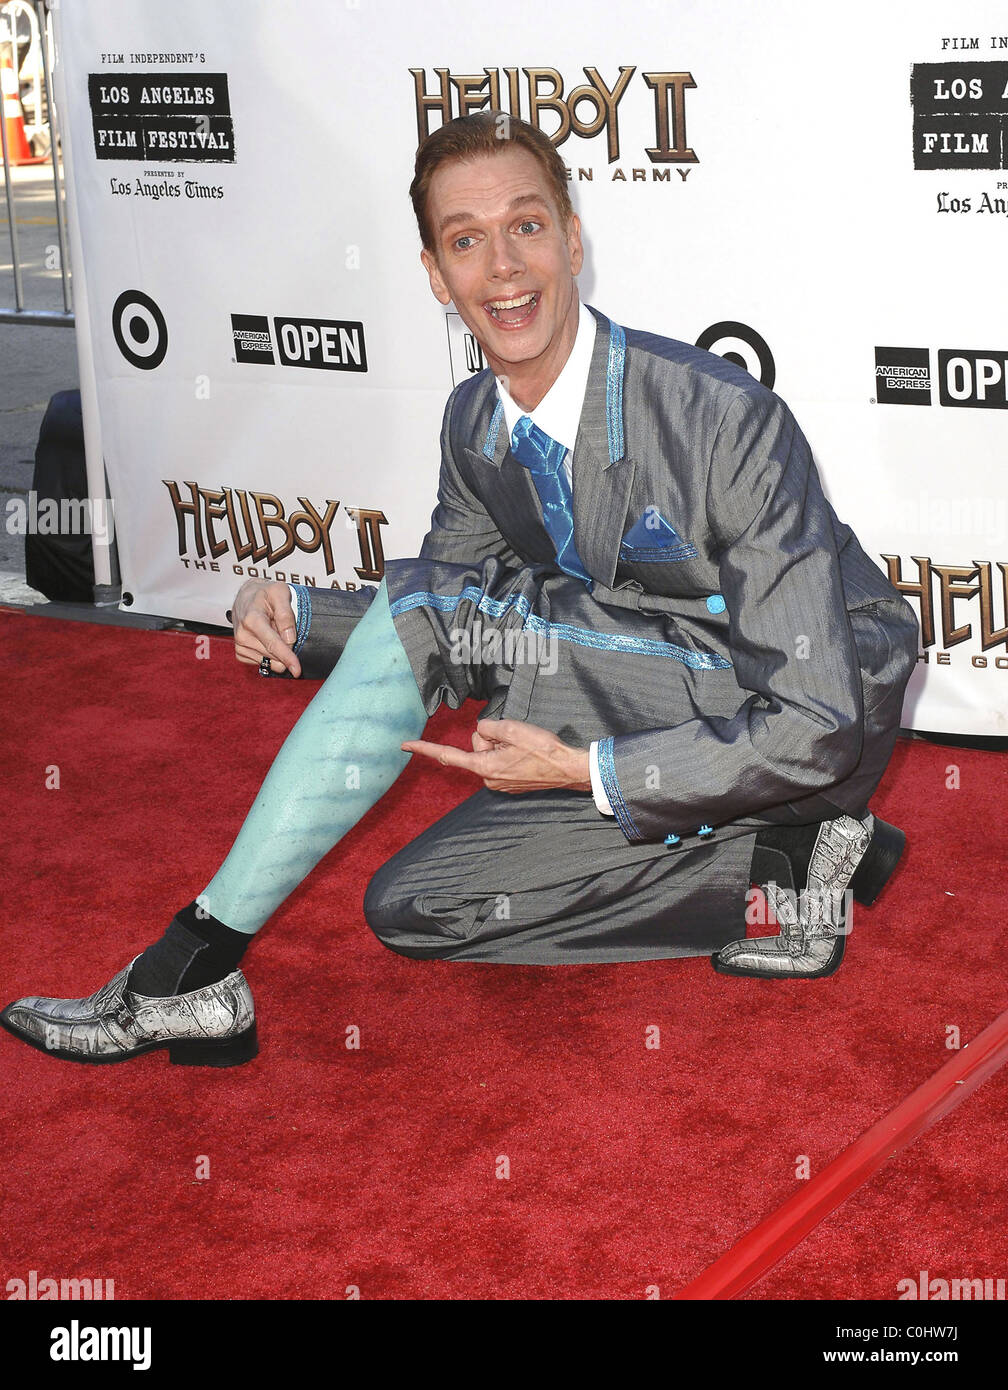 Doug Jones The 'Hellboy 2: The Golden Army' premiere at the Mann Village Theater Los Angeles, California - 28.06.08 Stock Photo